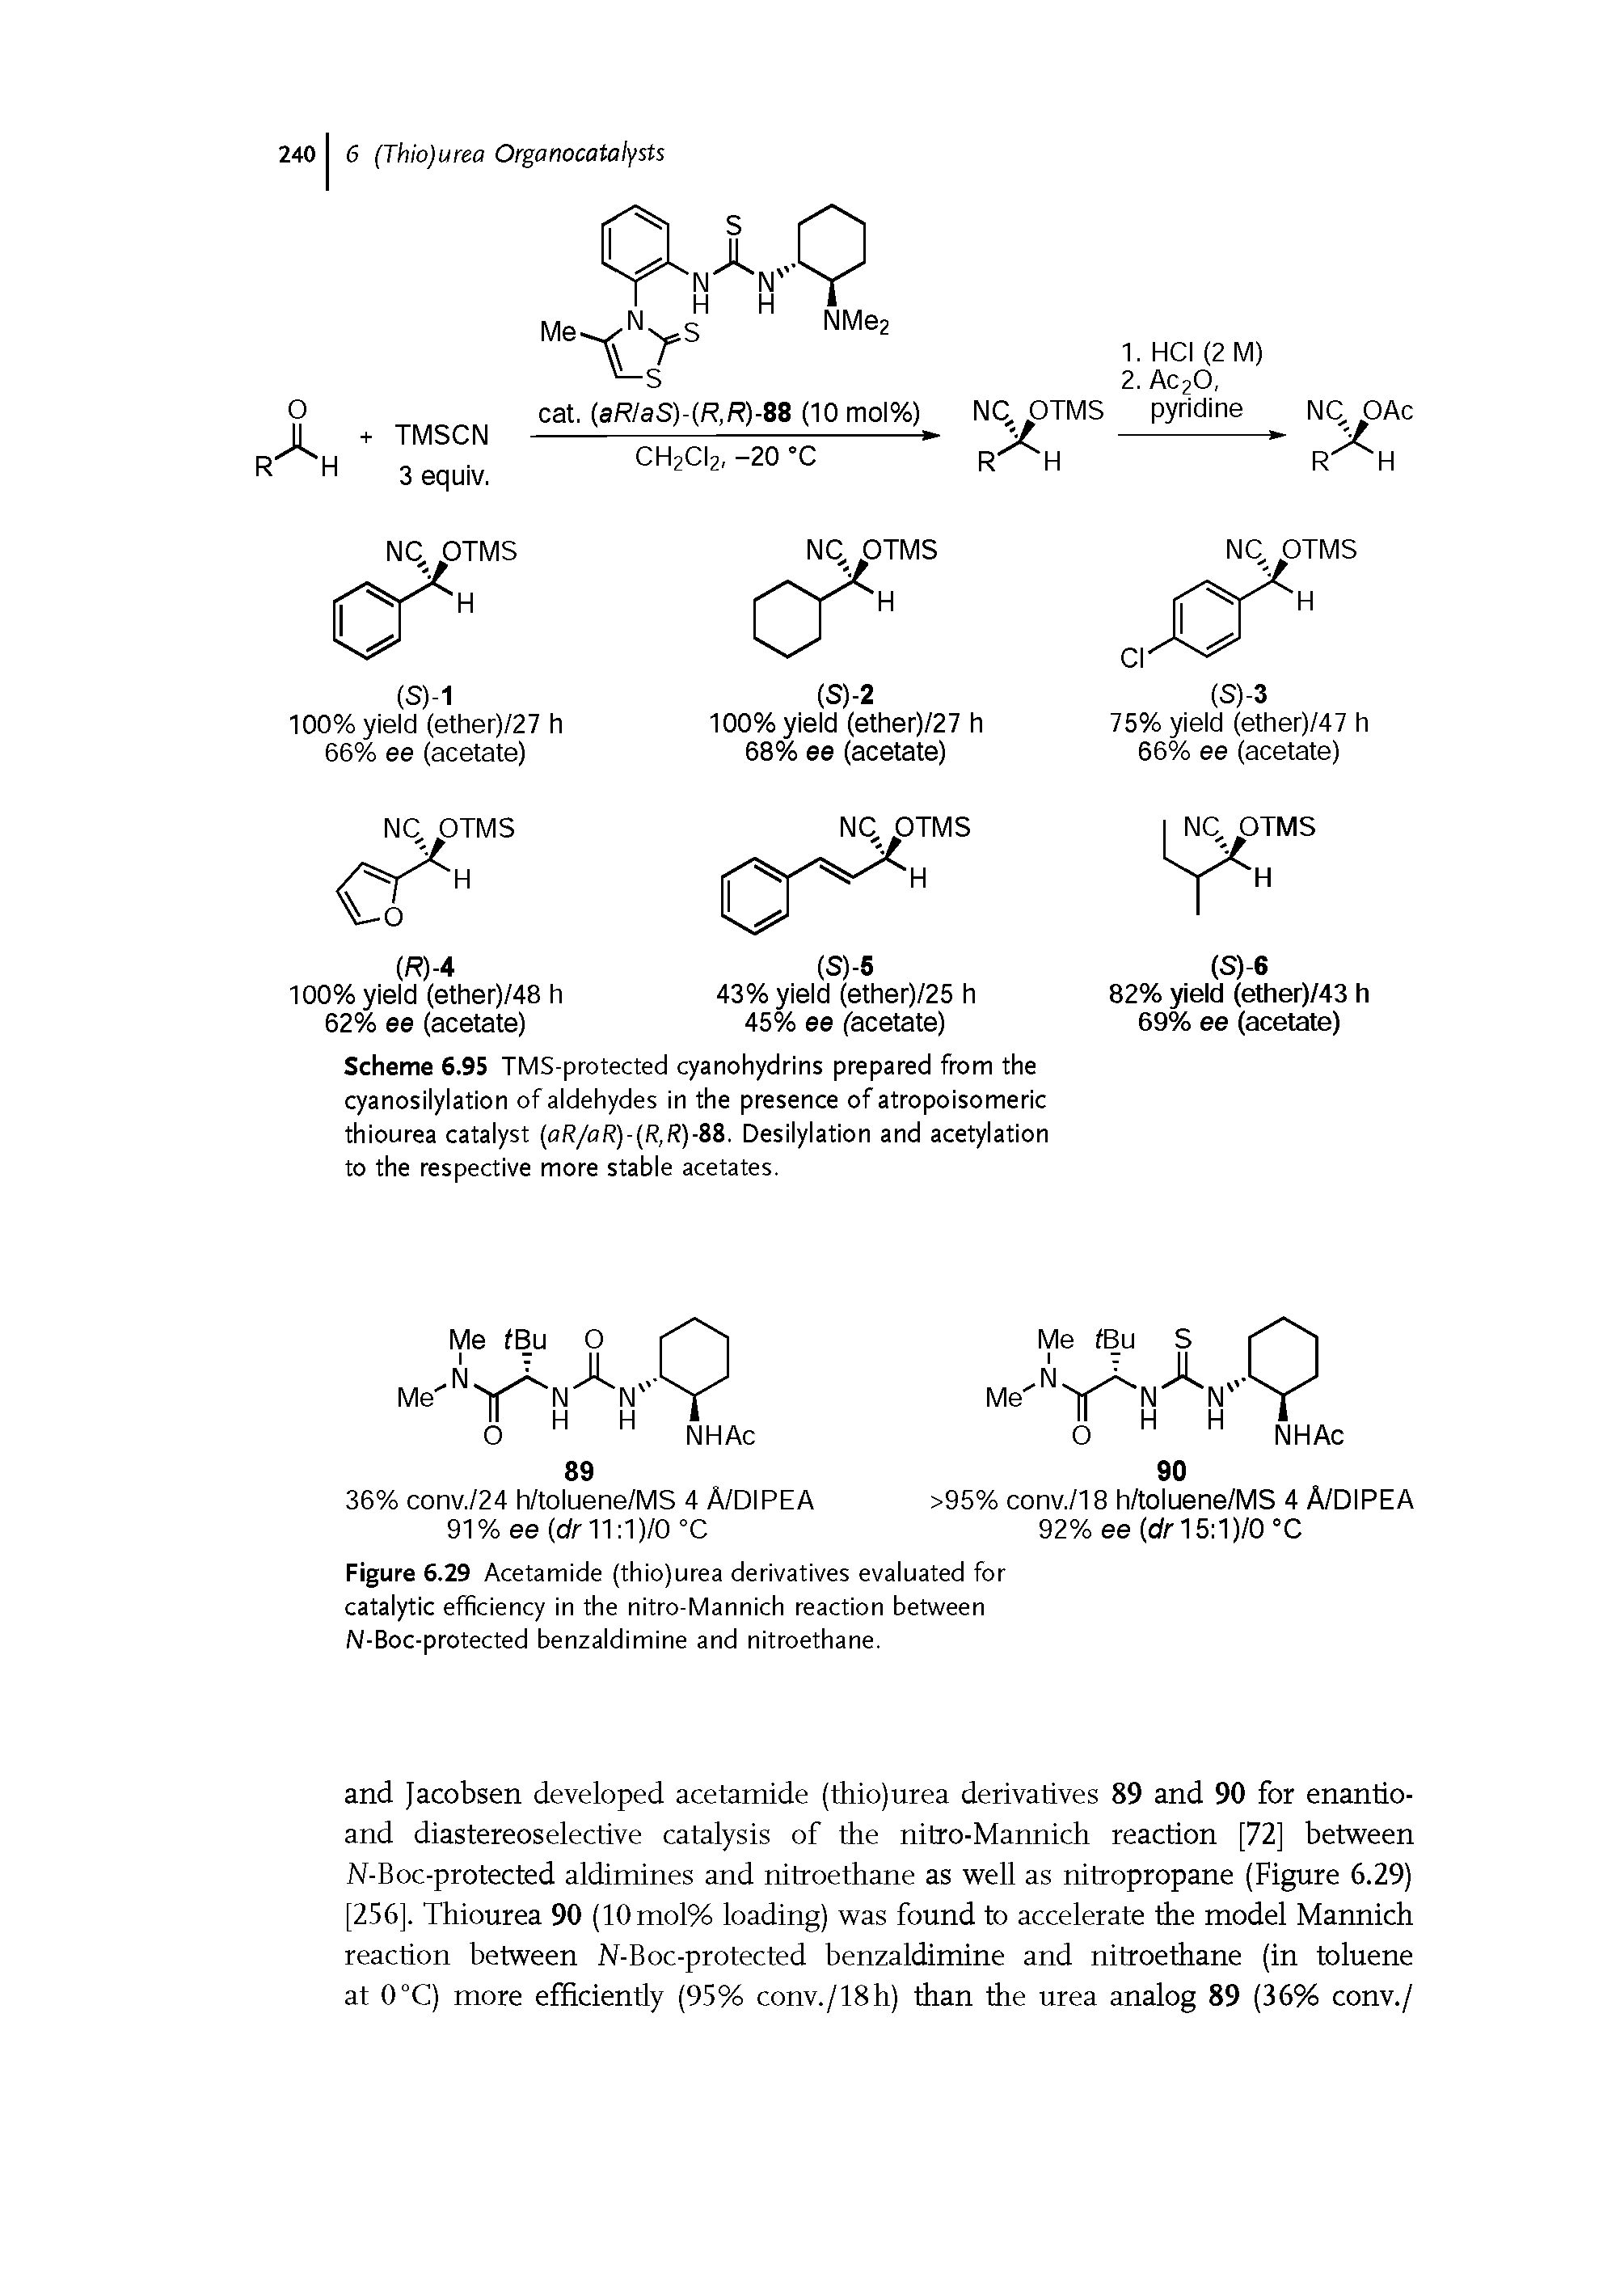 Scheme 6.95 TMS-protected cyanohydrins prepared from the cyanosilylation of aidehydes in the presence of atropoisomeric thiourea catalyst (aR/aR)-(R,R)-ZZ. Desilylation and acetylation to the respective more stable acetates.